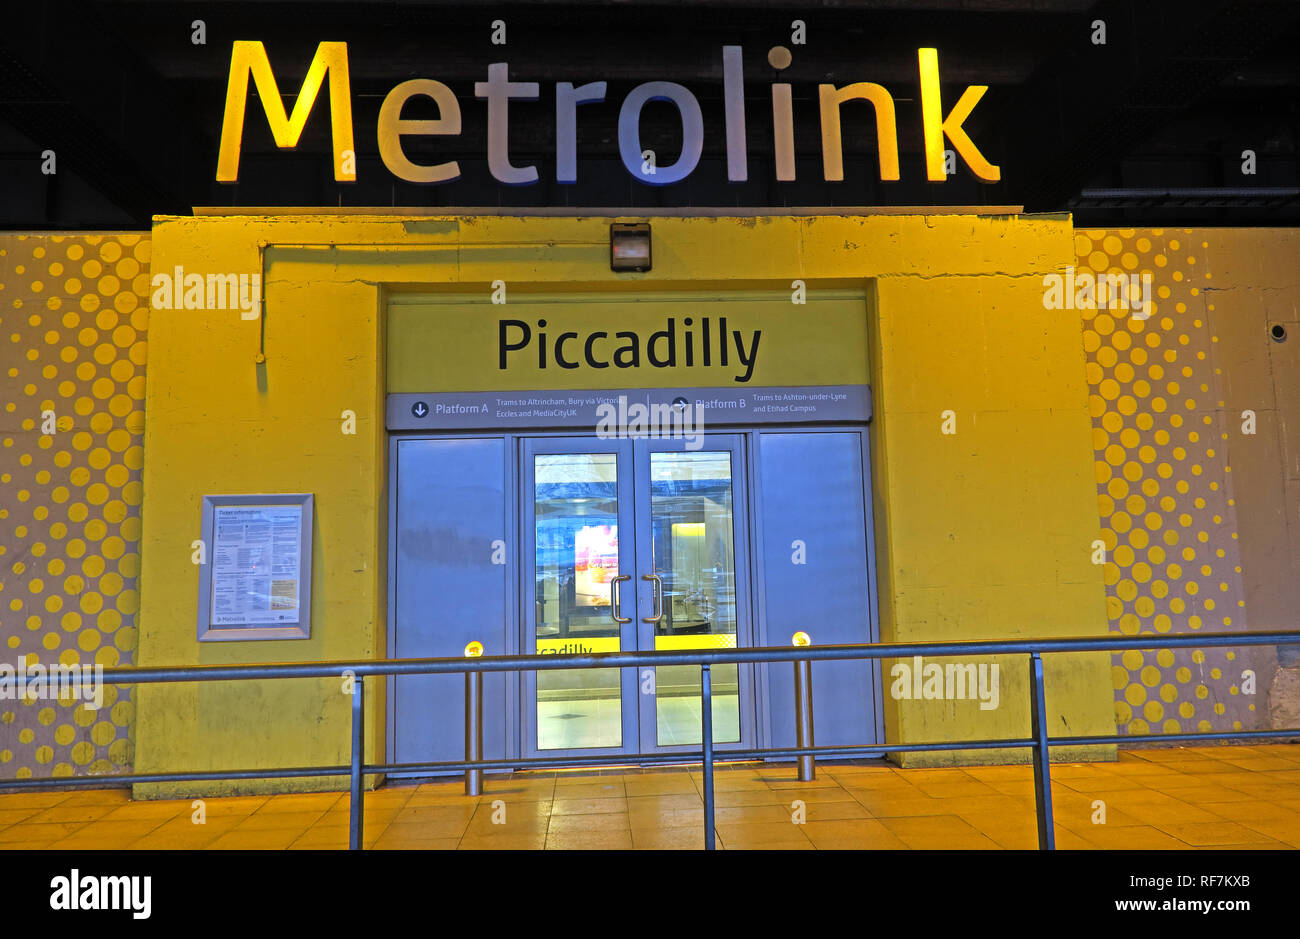 Metrolink di Manchester Piccadilly Tram interscambio, Fairfield Street, Manchester, UK, M1 2QF Foto Stock